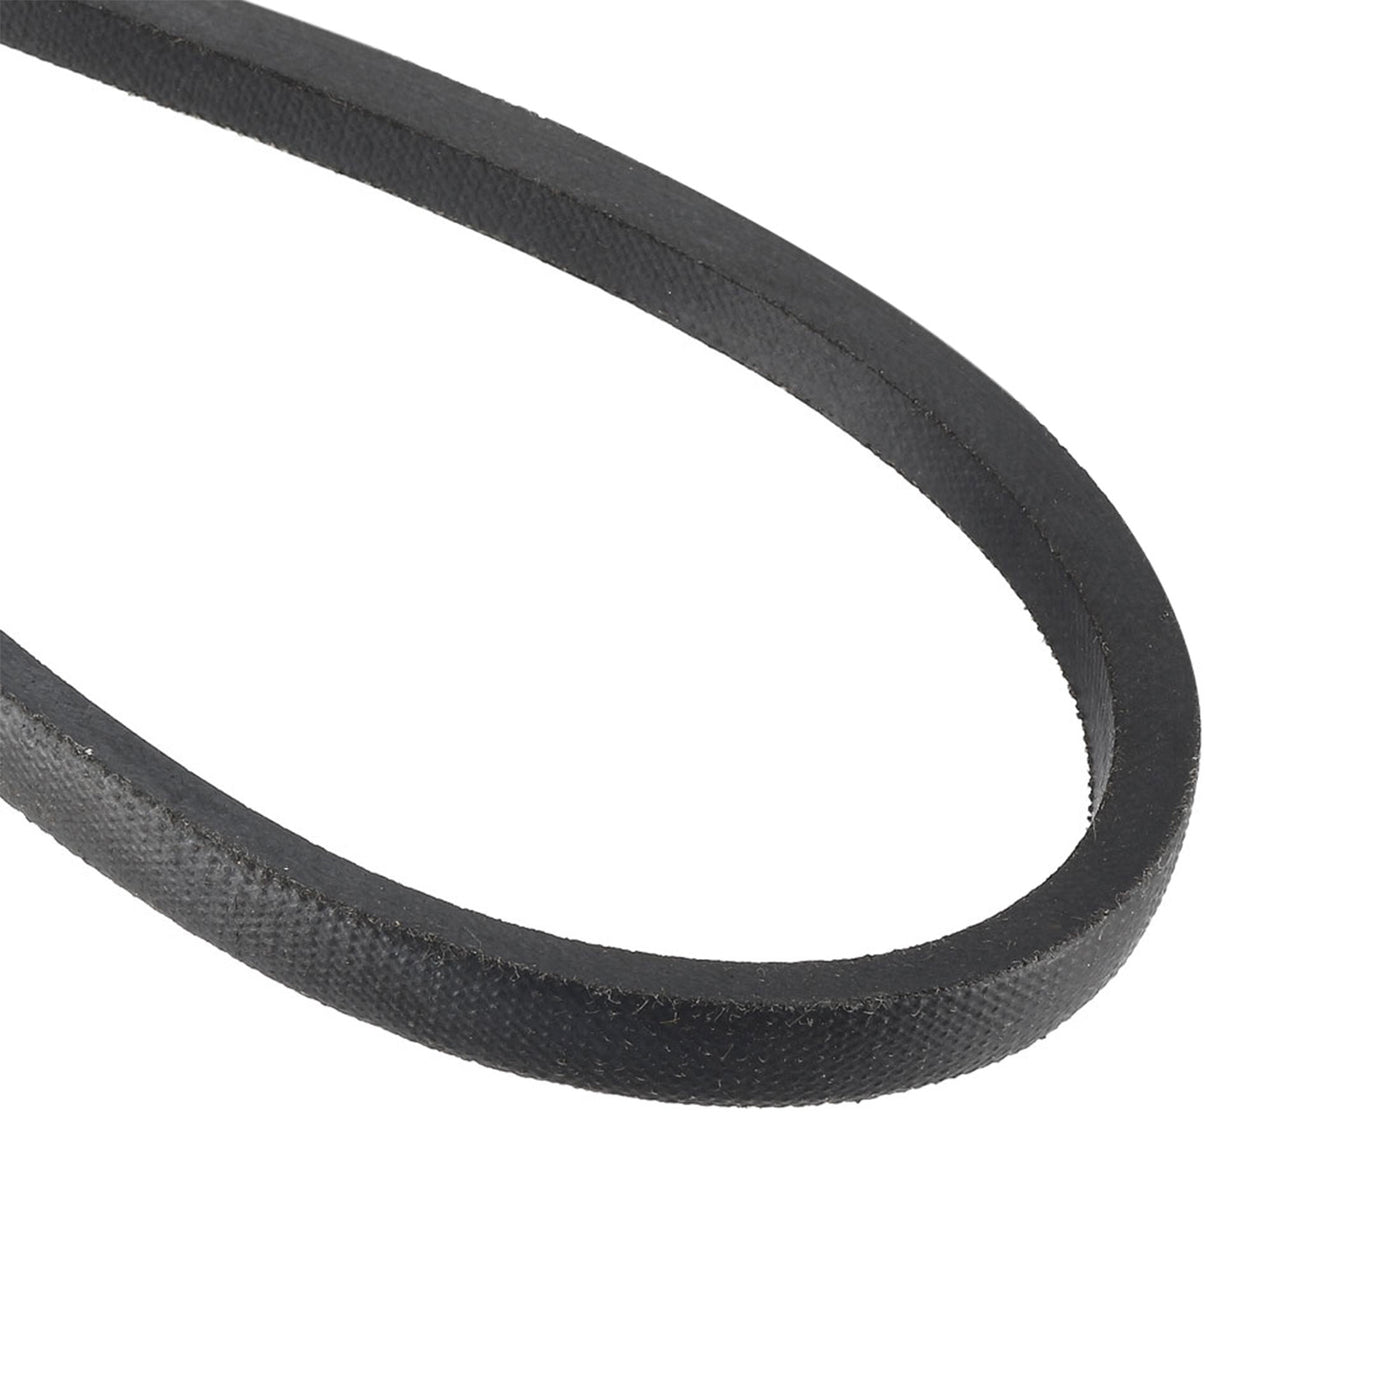 Uxcell Uxcell A1800/A71 V-Belts 71" Inner Girth, A-Section Rubber Drive Belt 2pcs